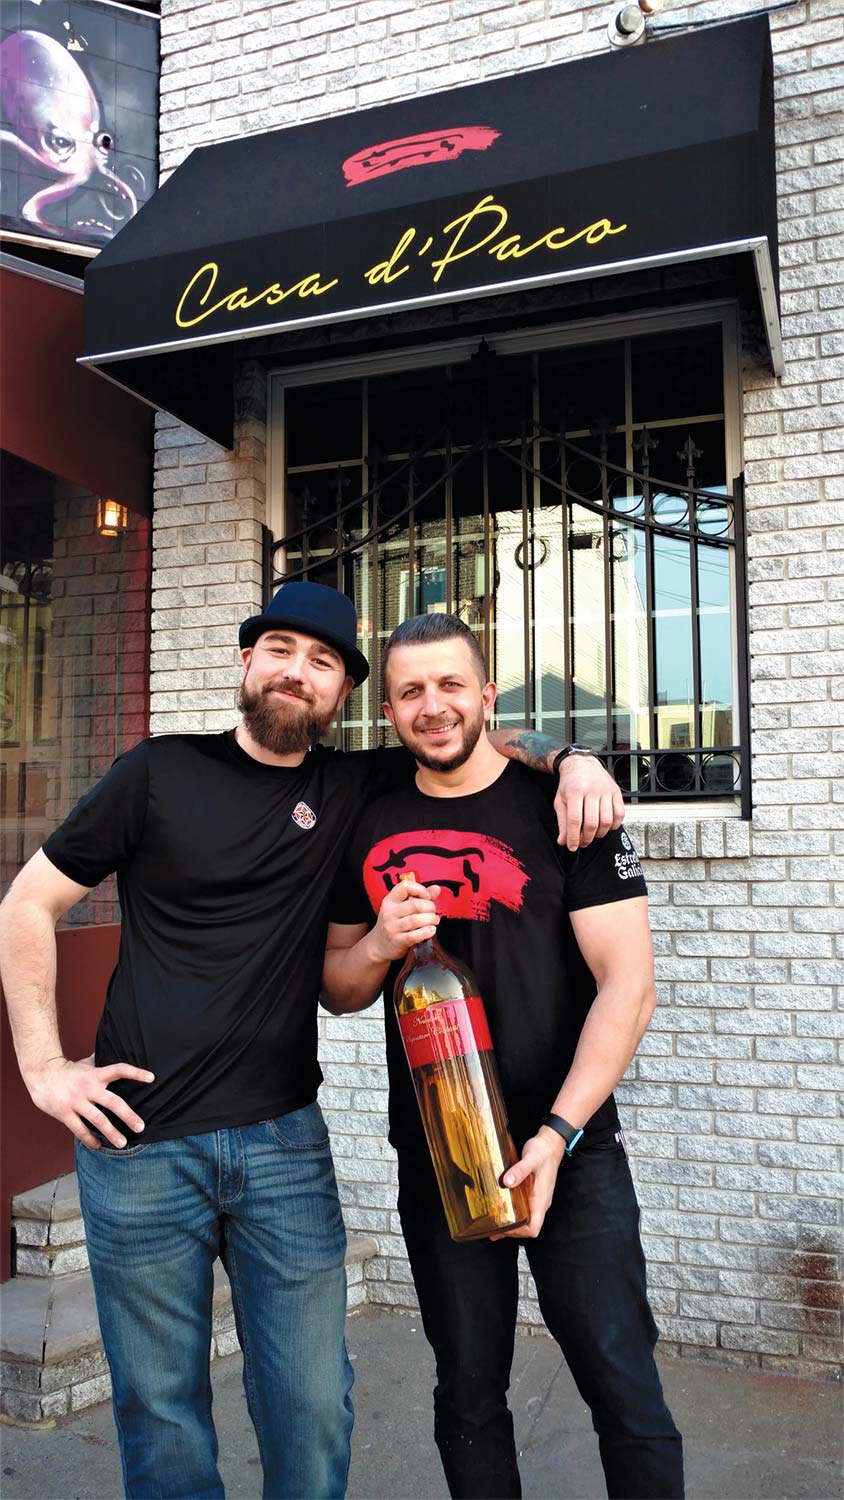 Casa d’Paco owner Angel Leston (left) and Todor, the bartender who created the drink. Trophy by GlassRoots, Newark.